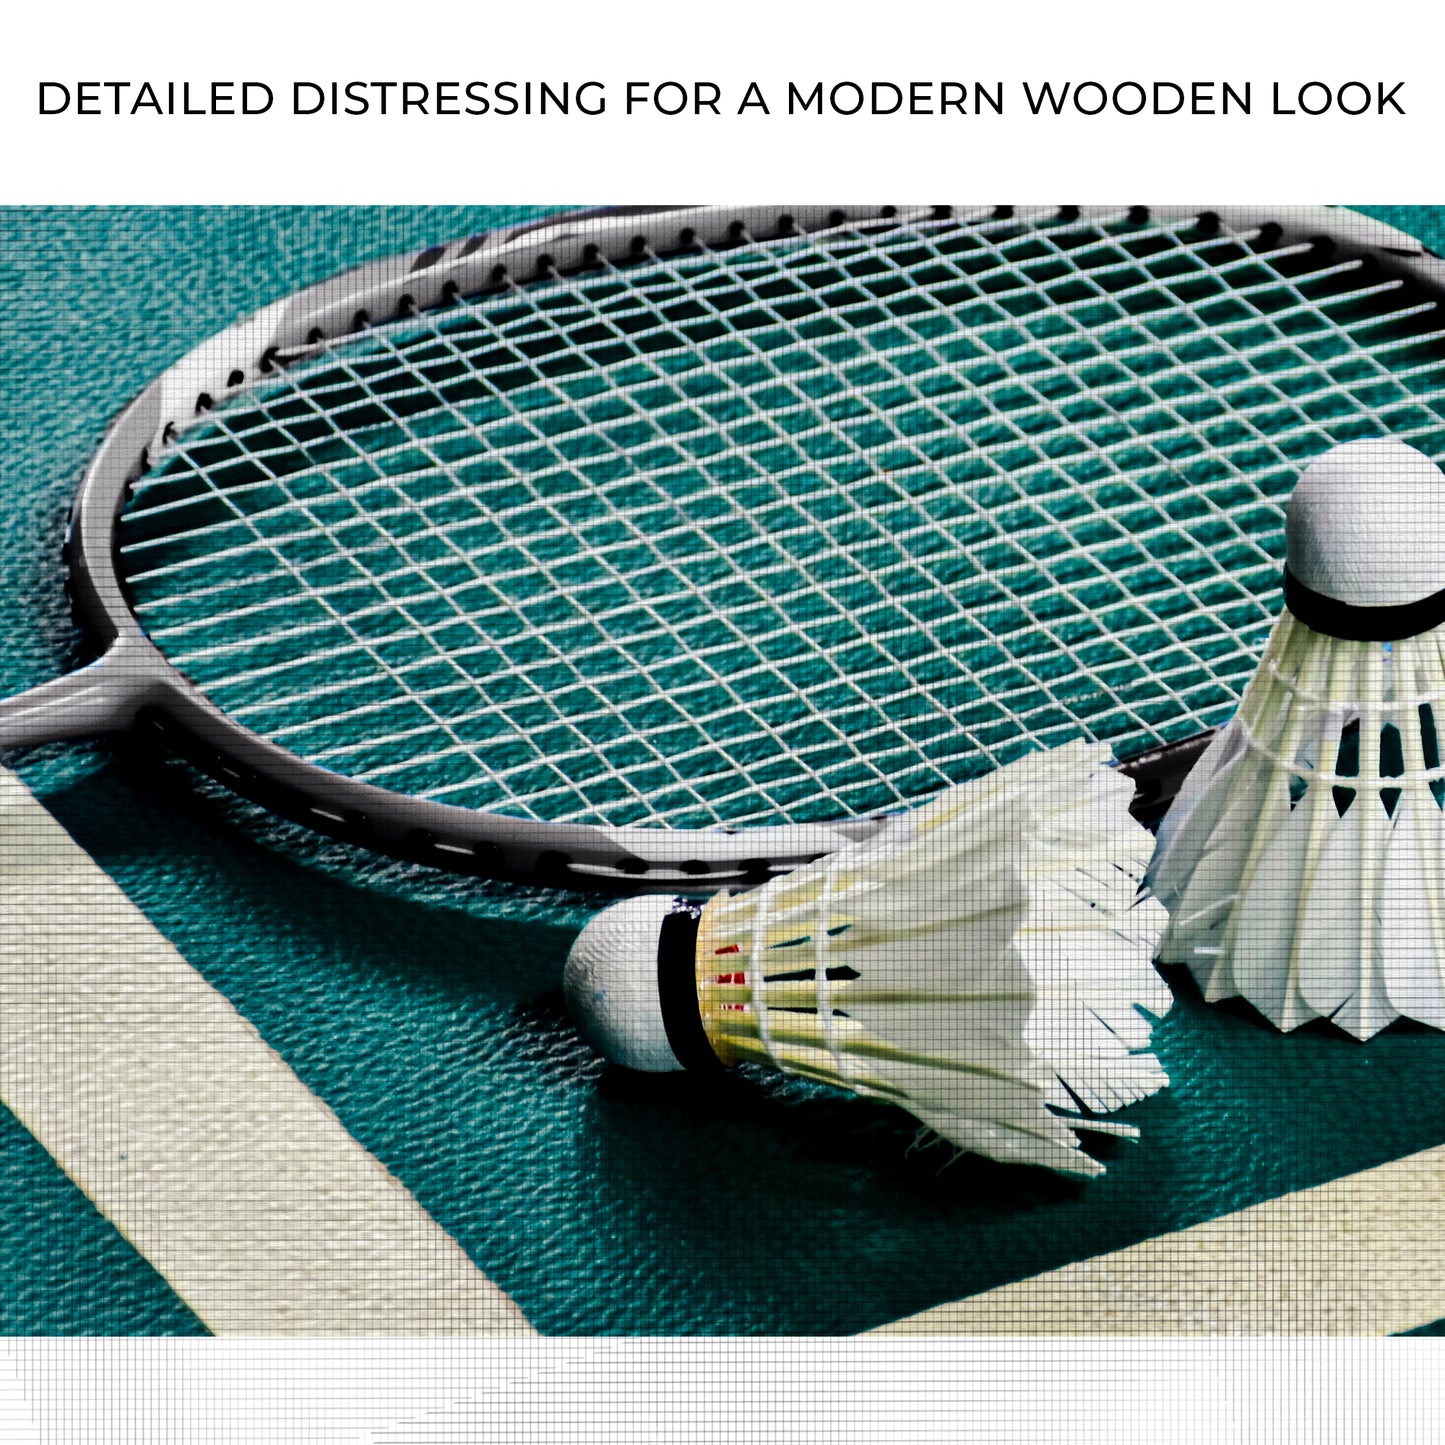 Badminton Gear Canvas Wall Art Zoom - Image by Tailored Canvases